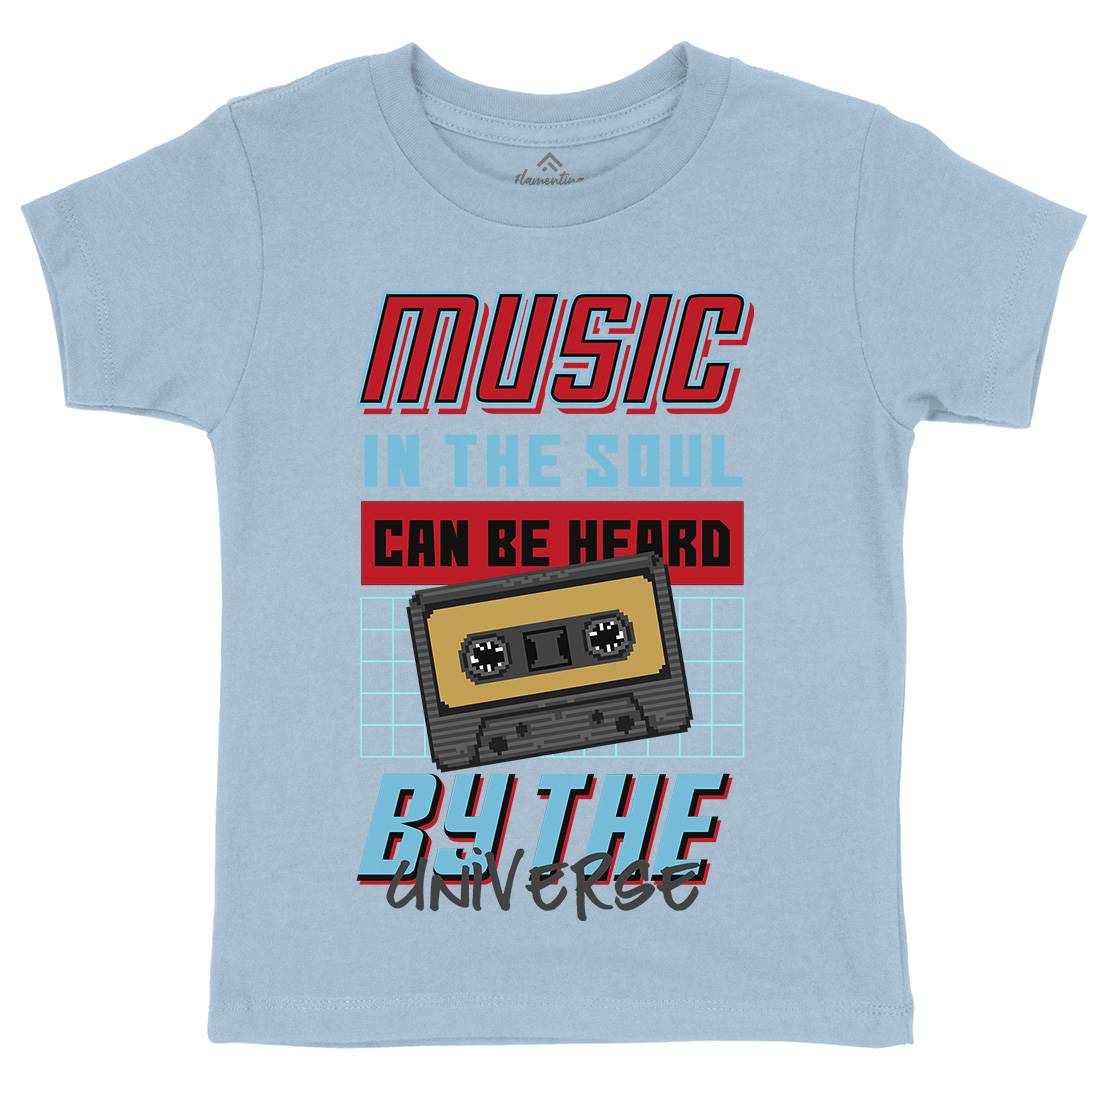 In The Soul Can Be Heard By The Universe Kids Organic Crew Neck T-Shirt Music B935